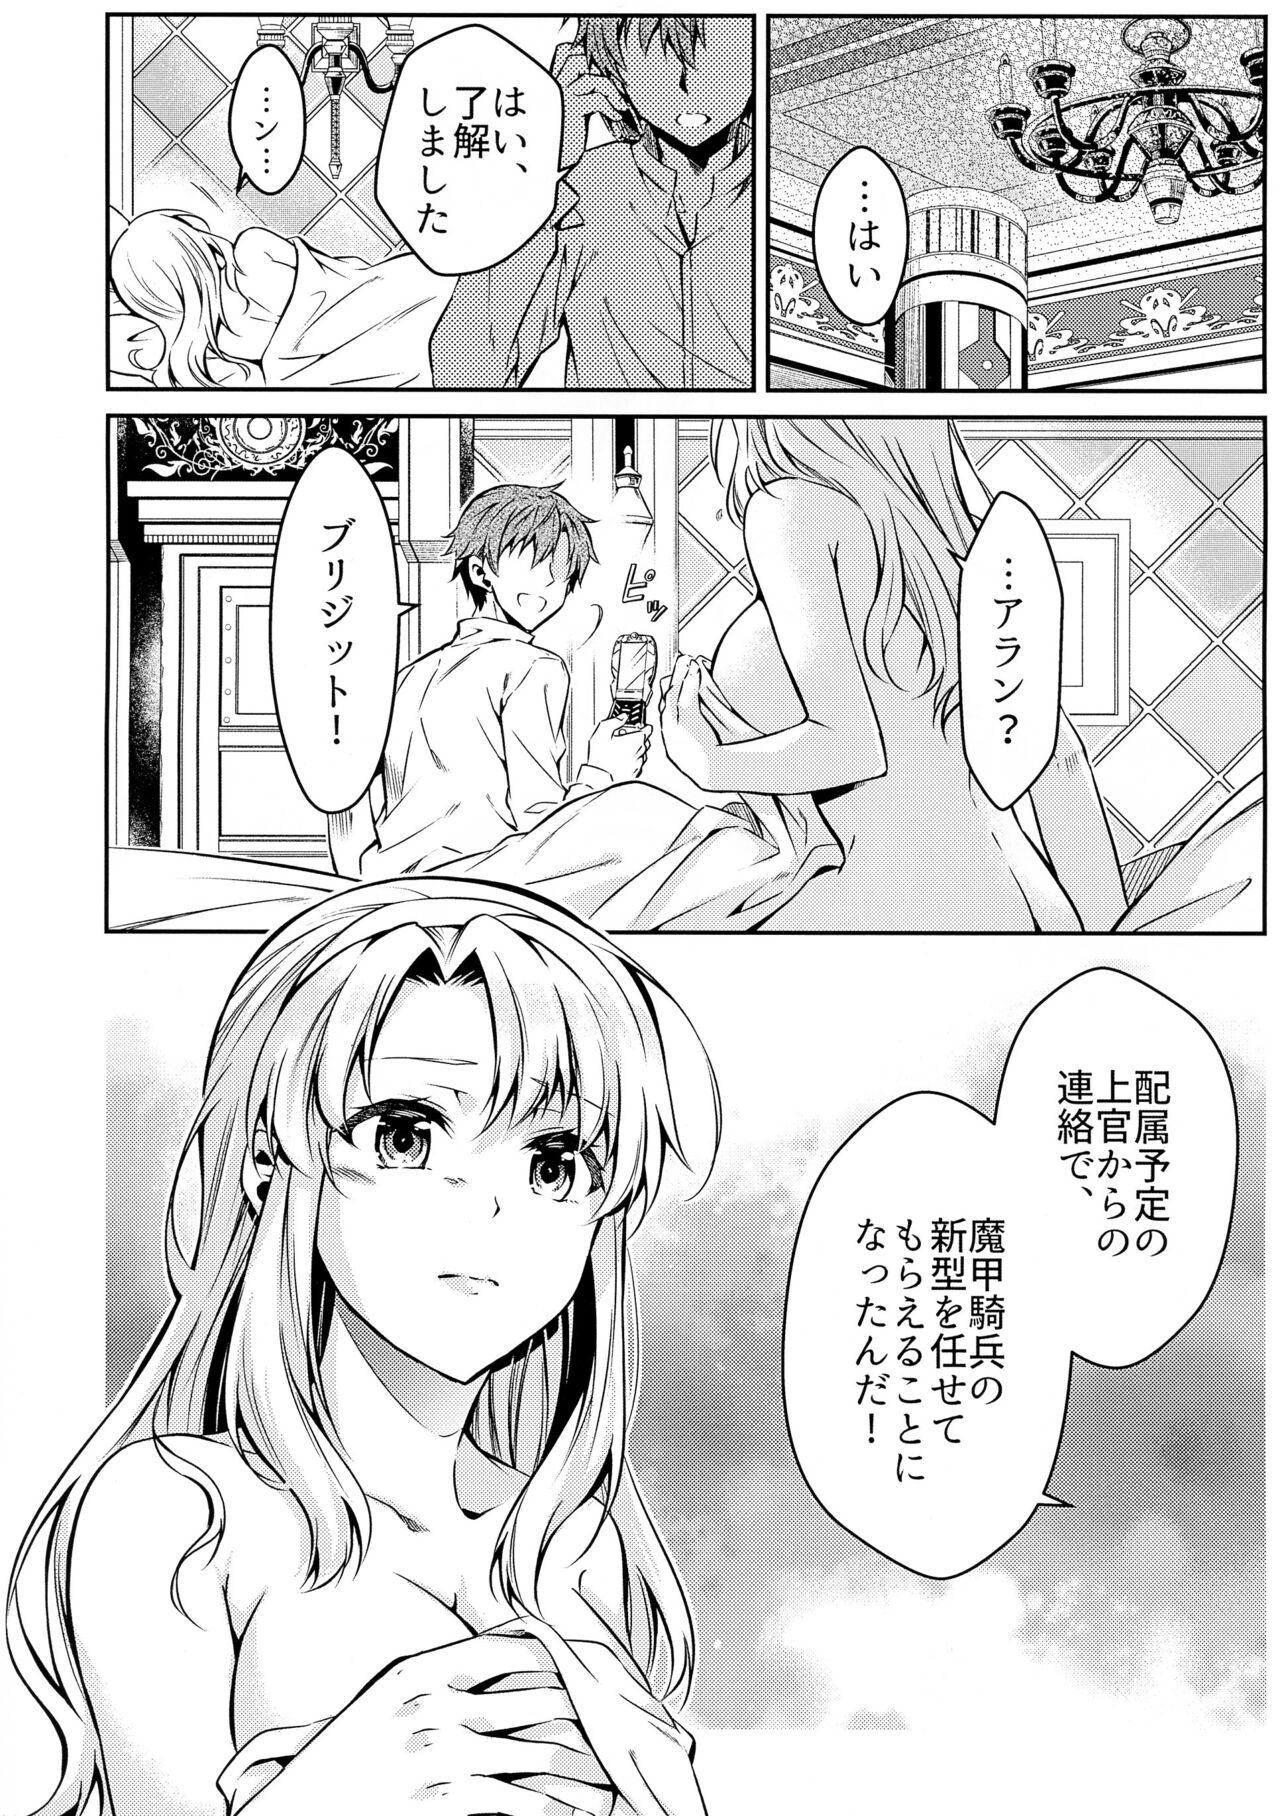 Sologirl Affection & Blessing - The legend of heroes | eiyuu densetsu Nena - Page 5